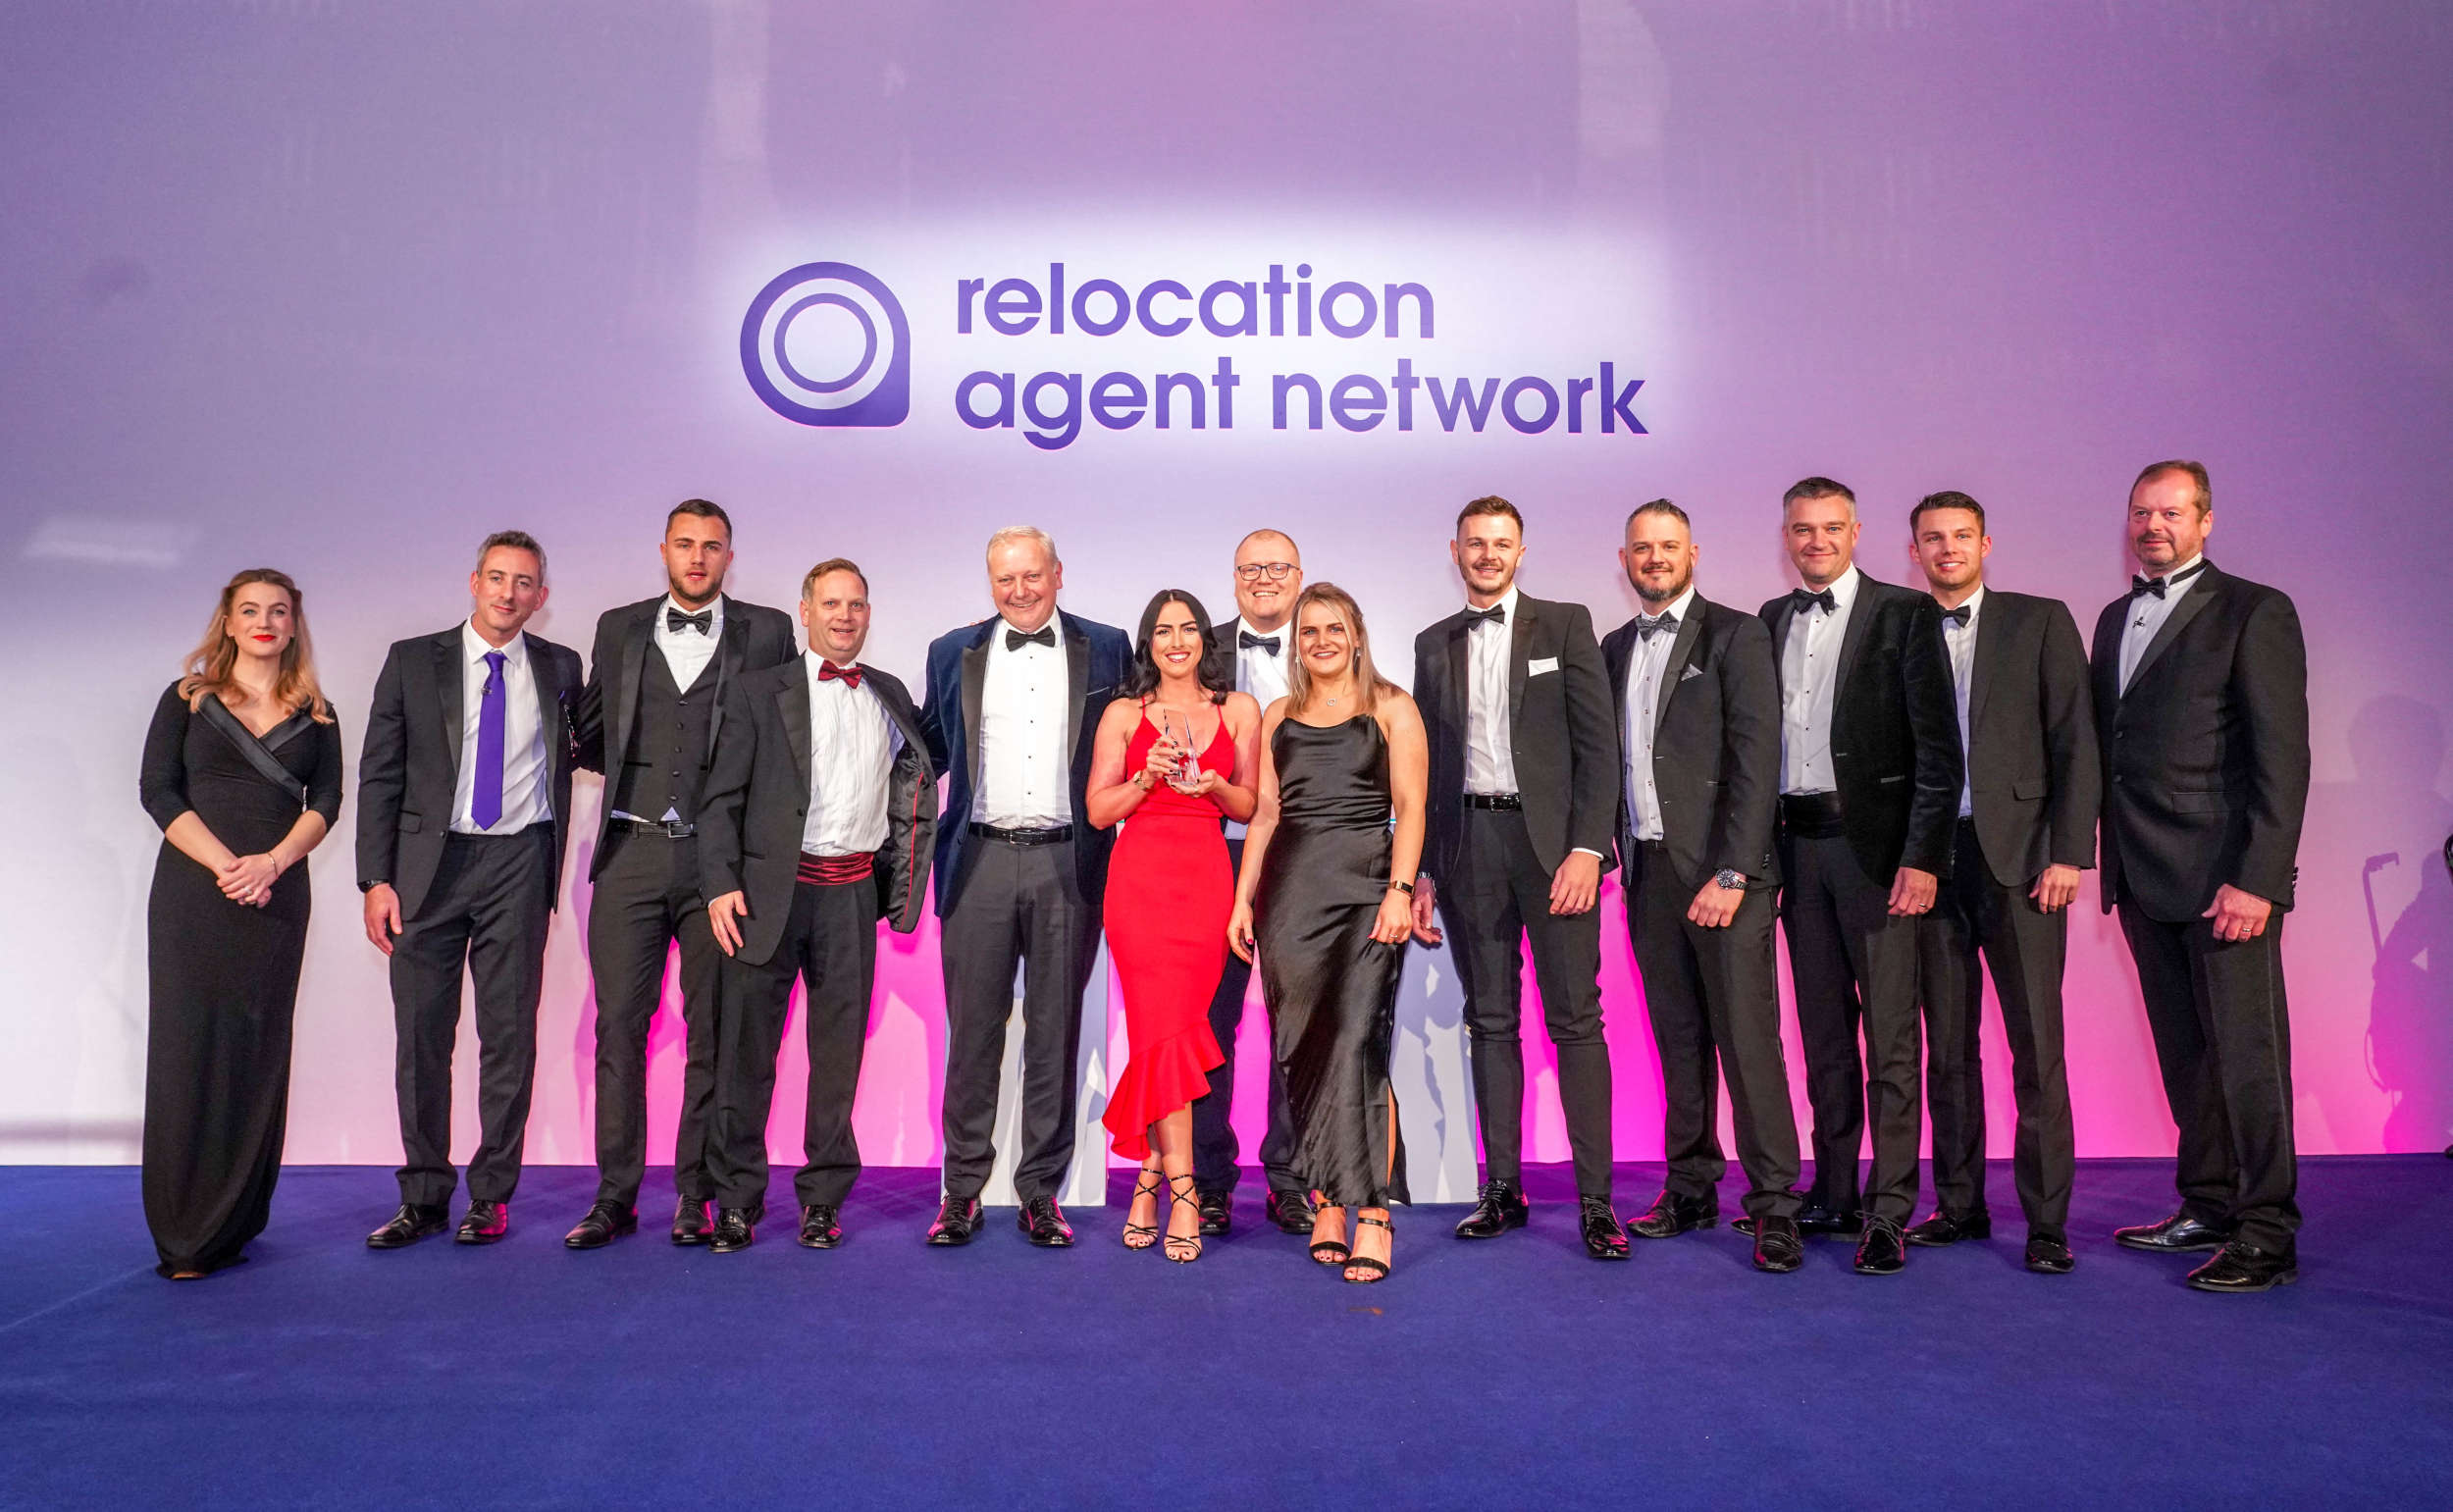 More awards won at the Relocation Agent Network conference!